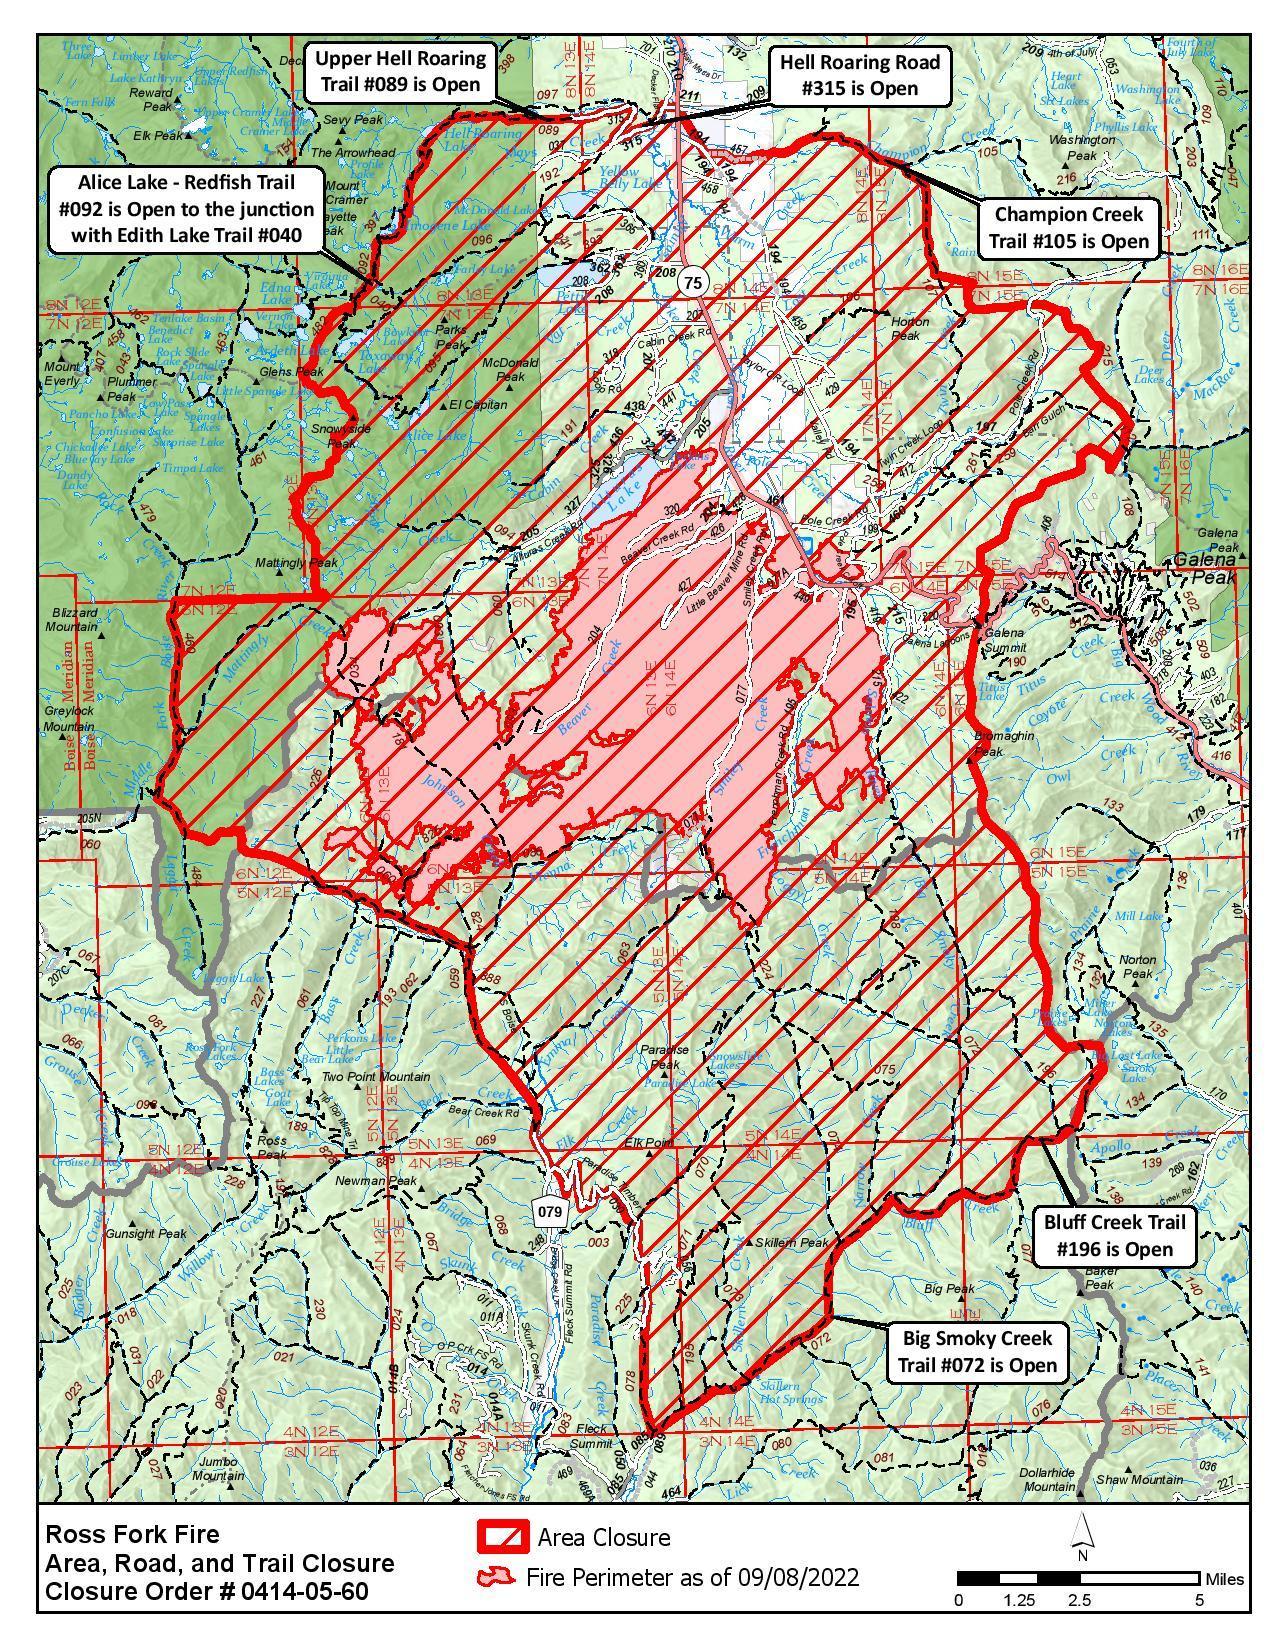 Expanded Ross Fork Fire Closure Area, Thurs, 9/15